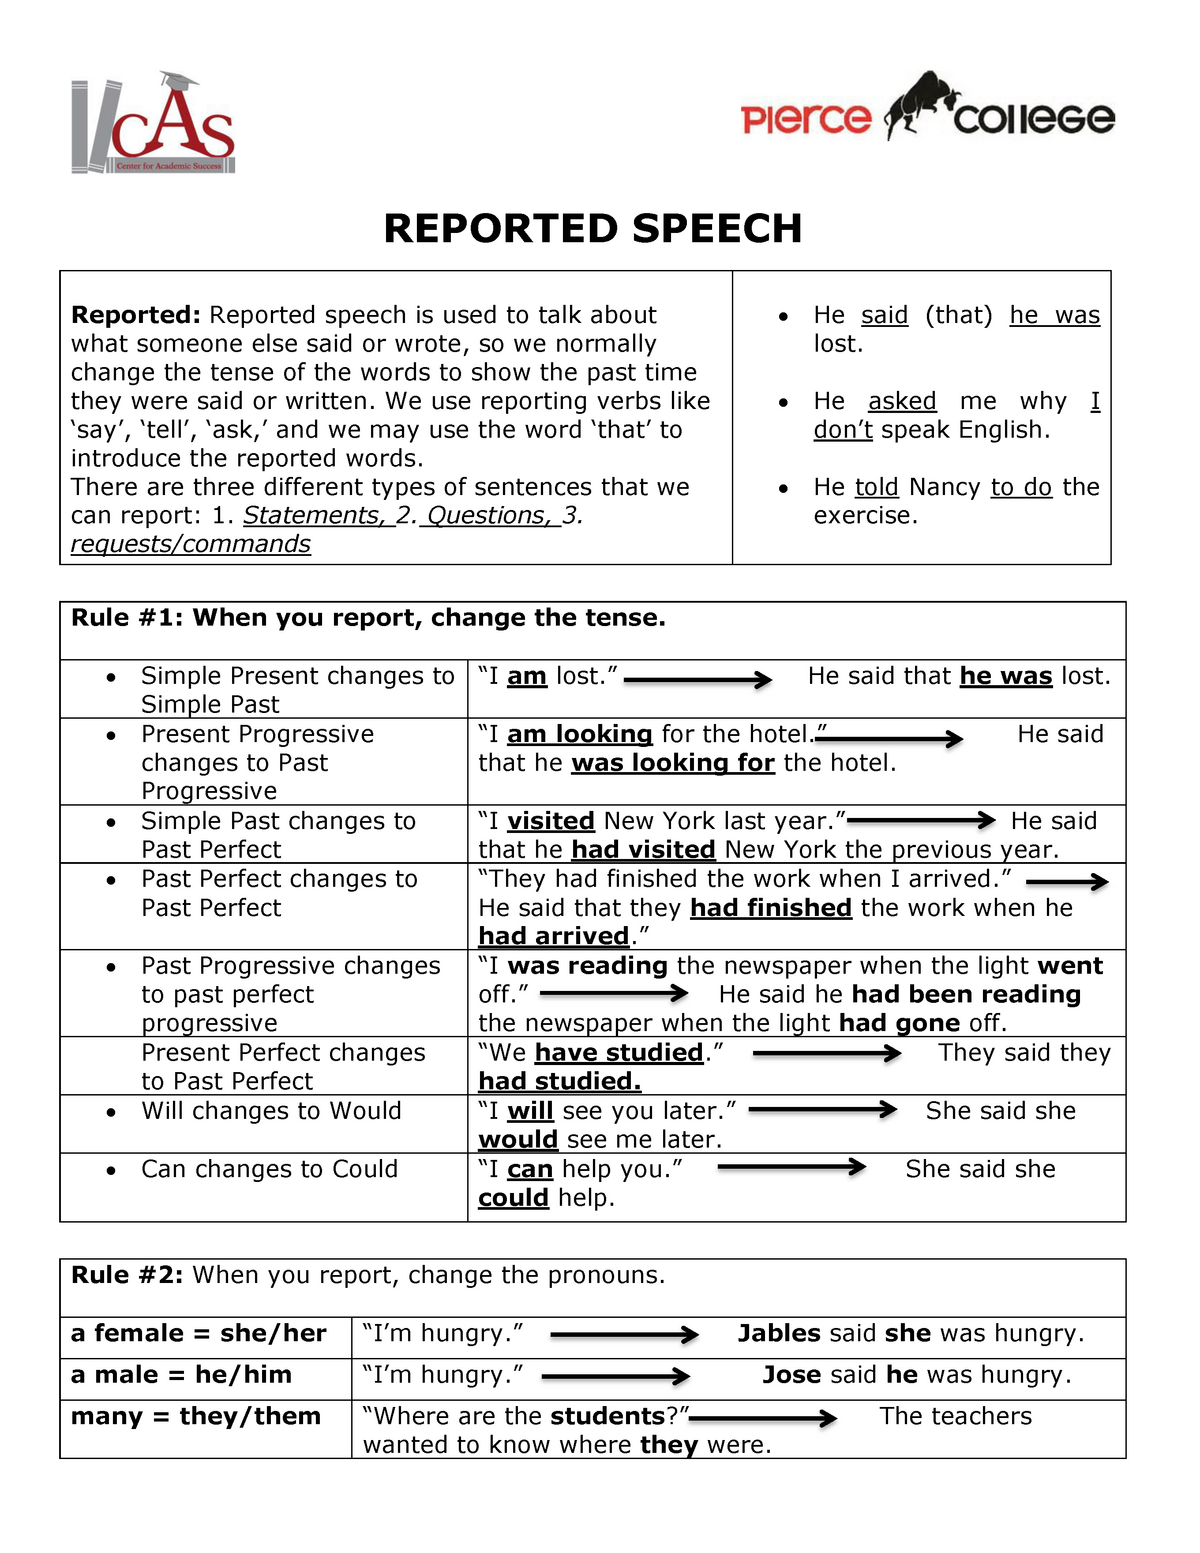 Reported Speech say tell ask. Reported Speech exercises. Say tell reported Speech. Reported Speech Commands and requests exercises.